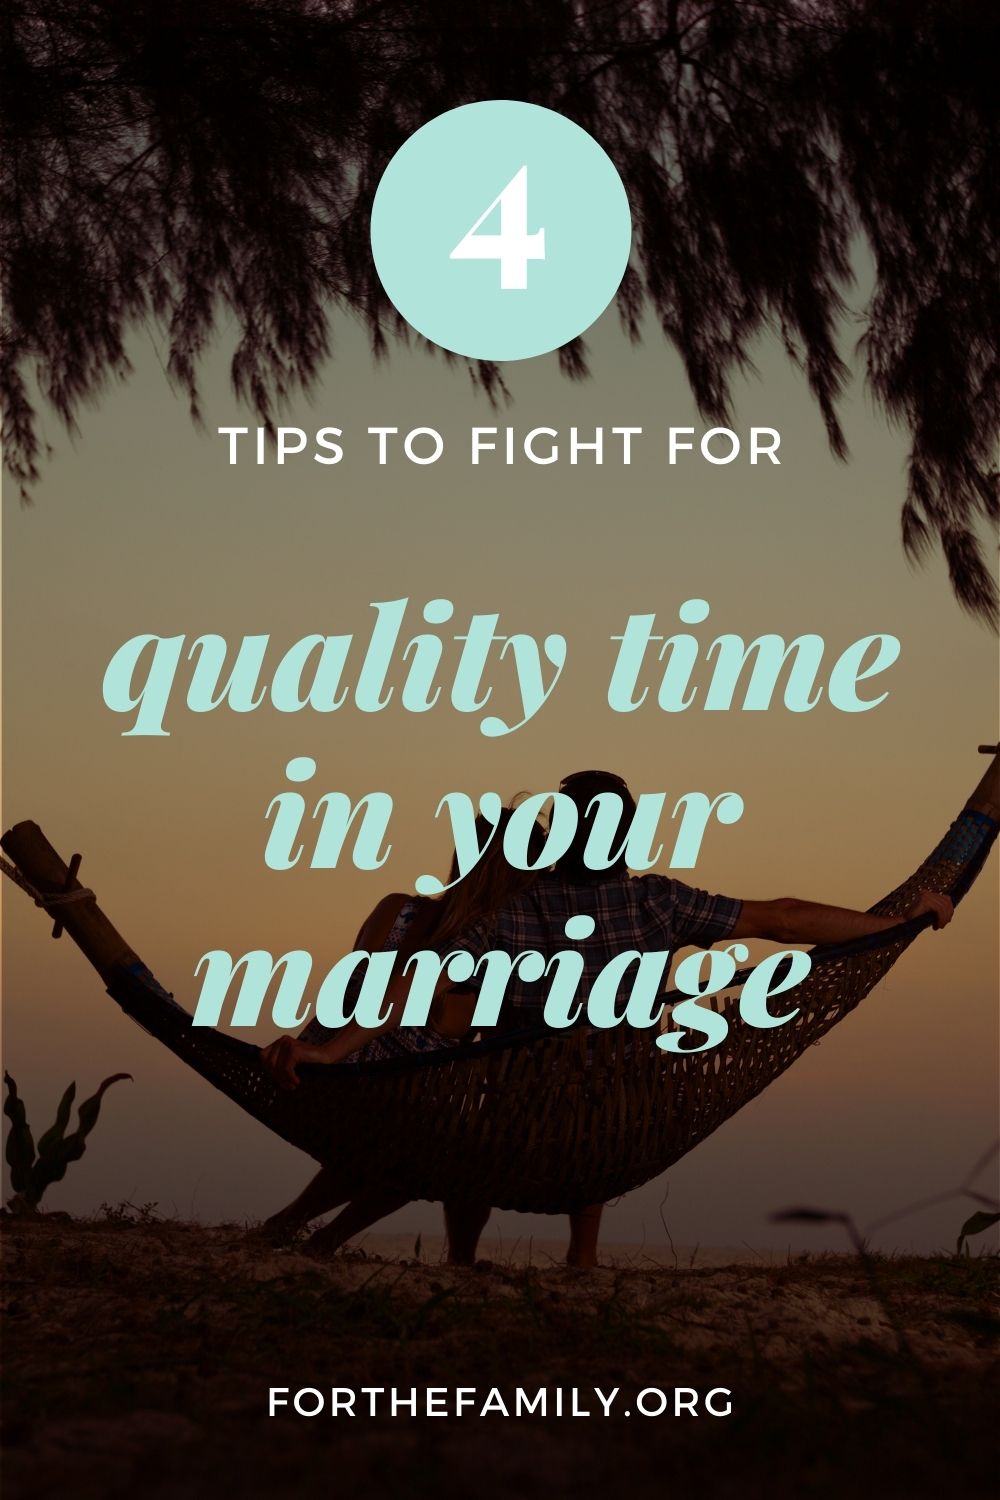 4 Tips to Fight for Quality Time in Your Marriage